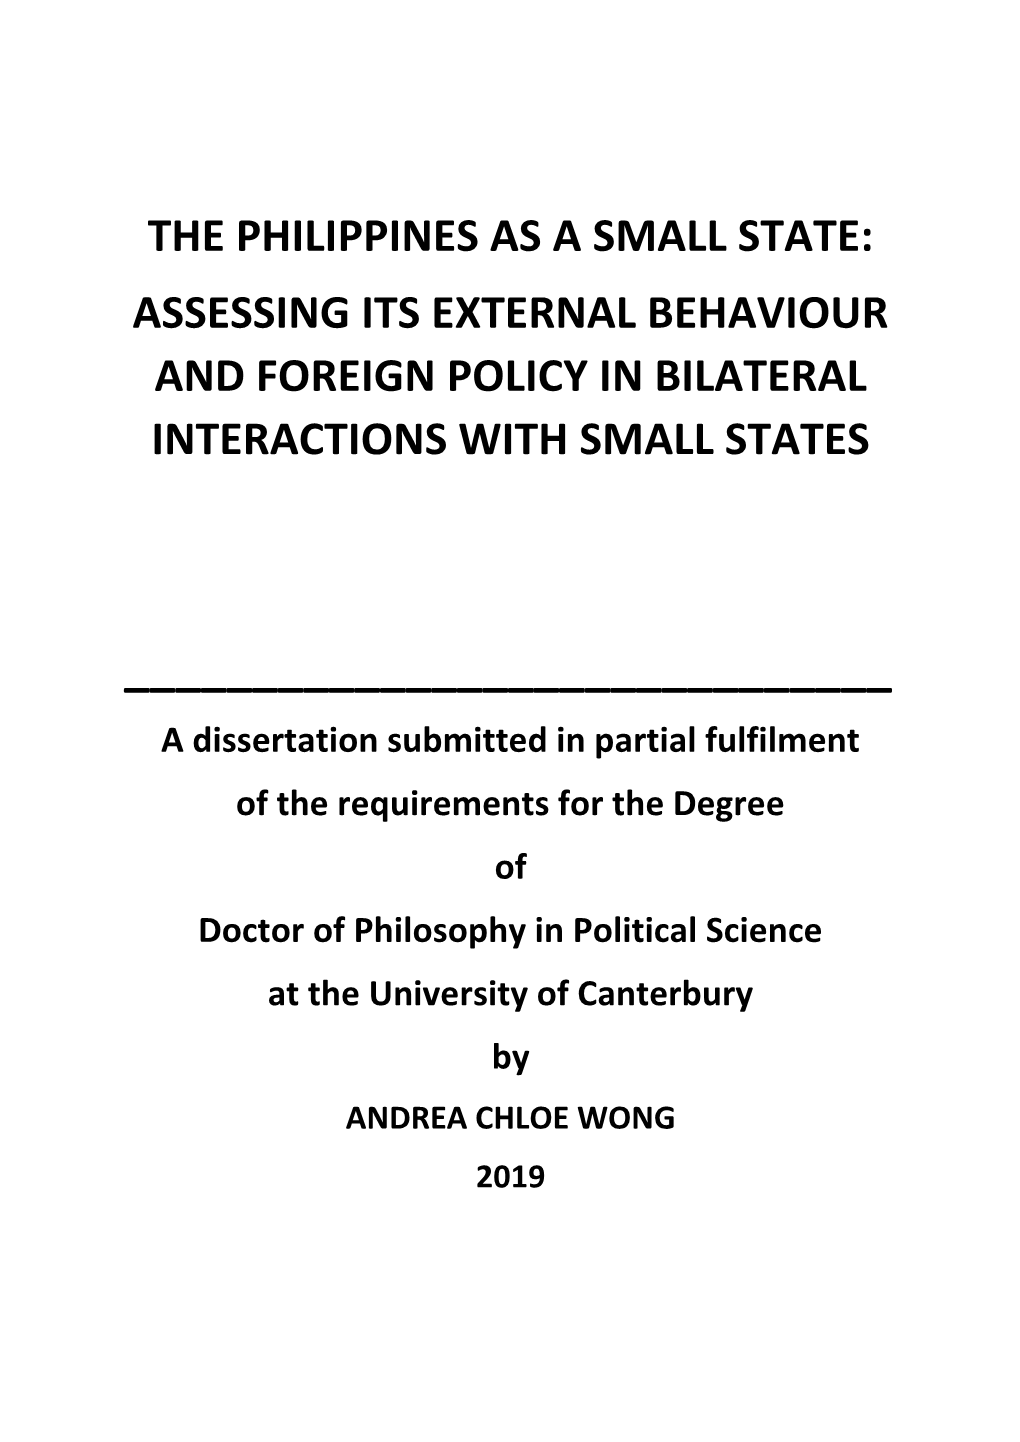 The Philippines As a Small State: Assessing Its External Behaviour and Foreign Policy in Bilateral Interactions with Small States